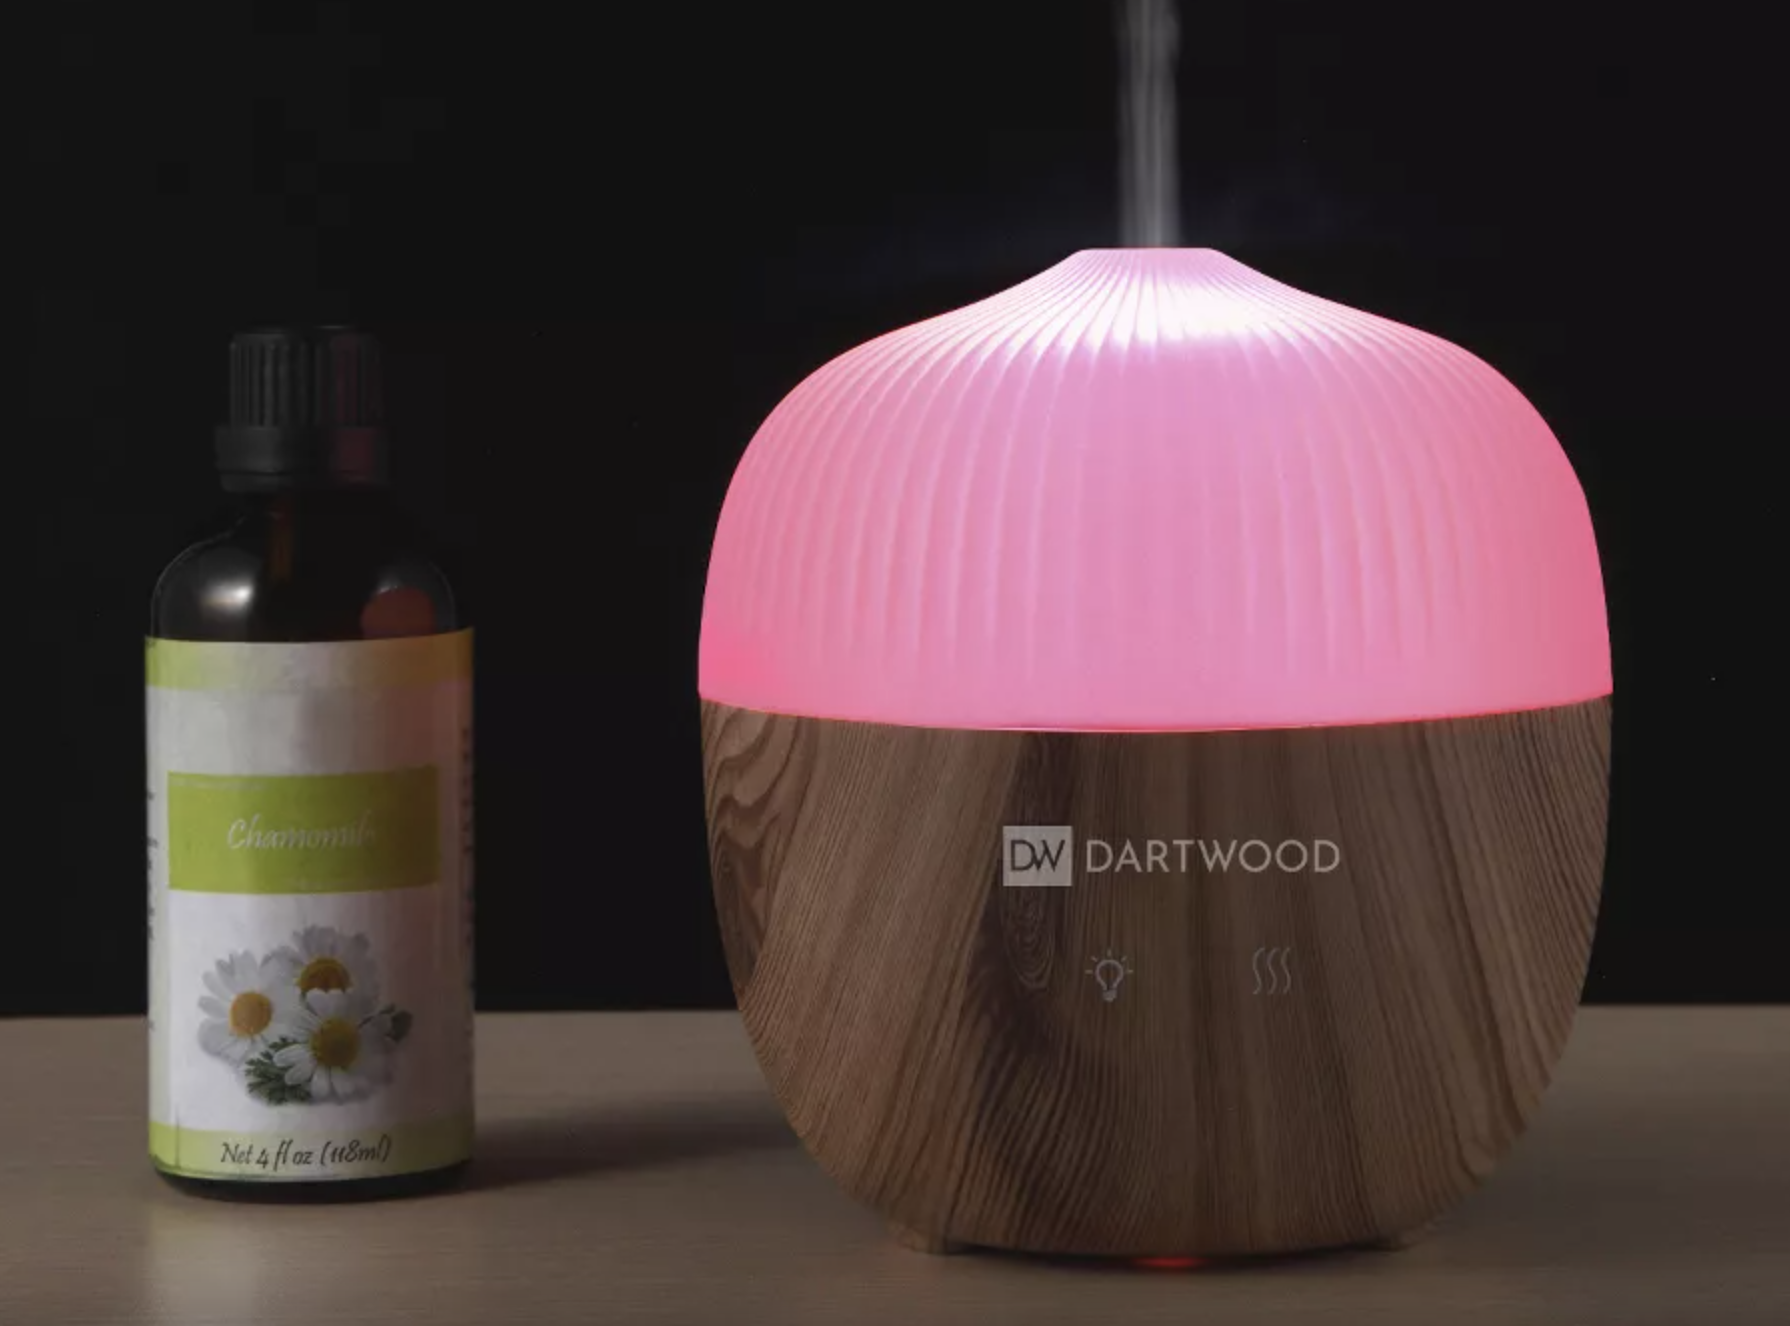 the pink diffuser next to a bottle of essential oil